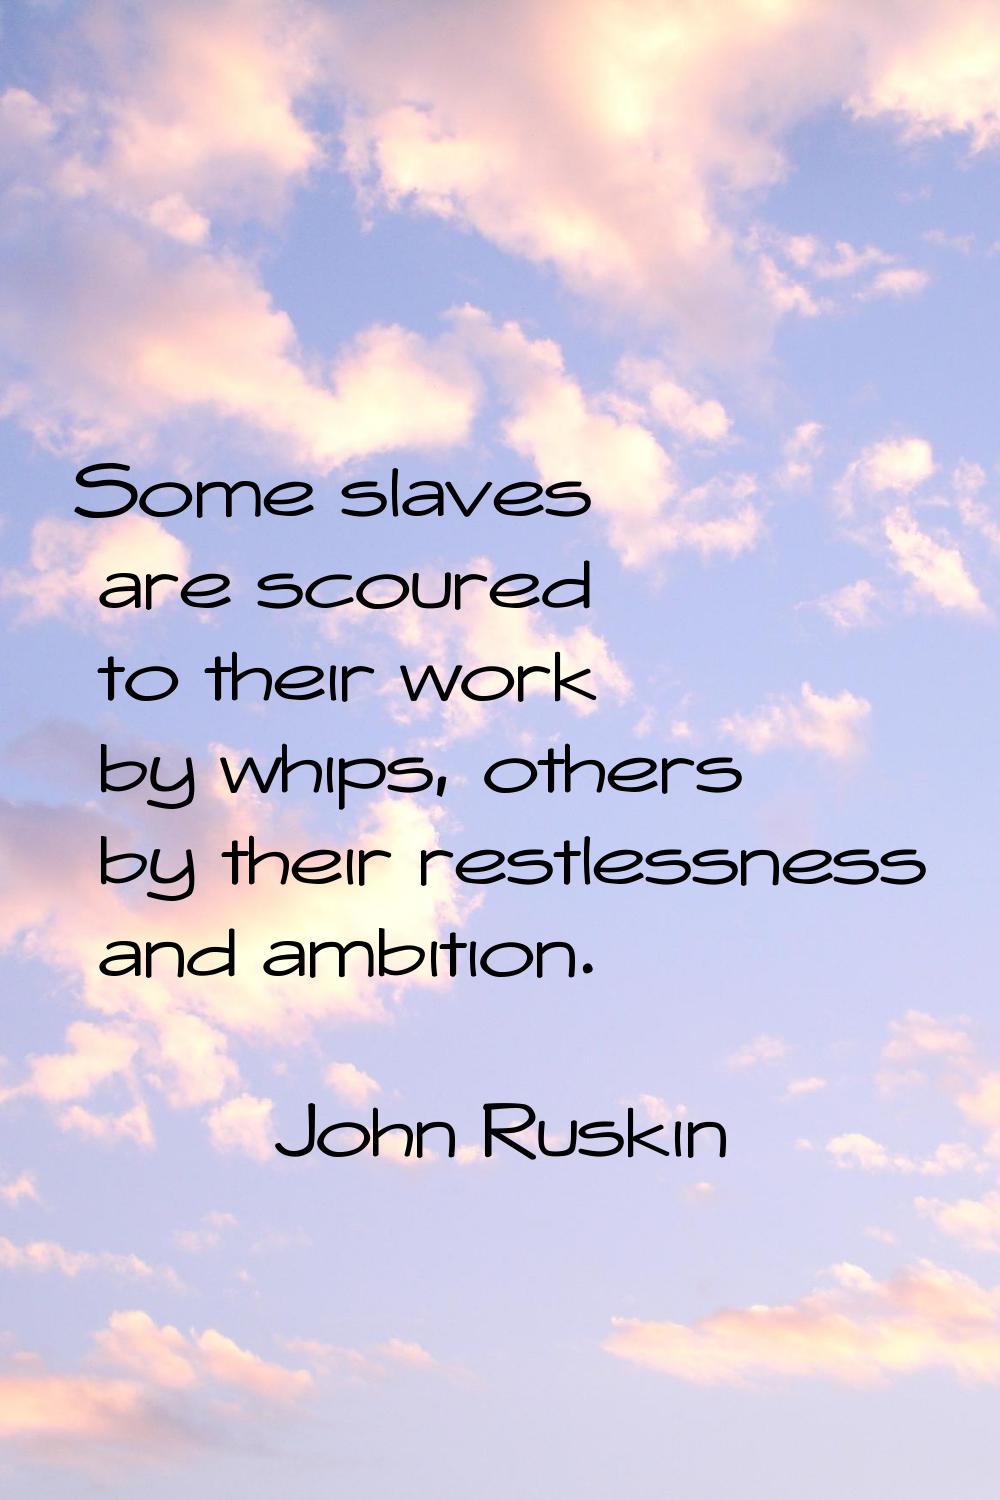 Some slaves are scoured to their work by whips, others by their restlessness and ambition.